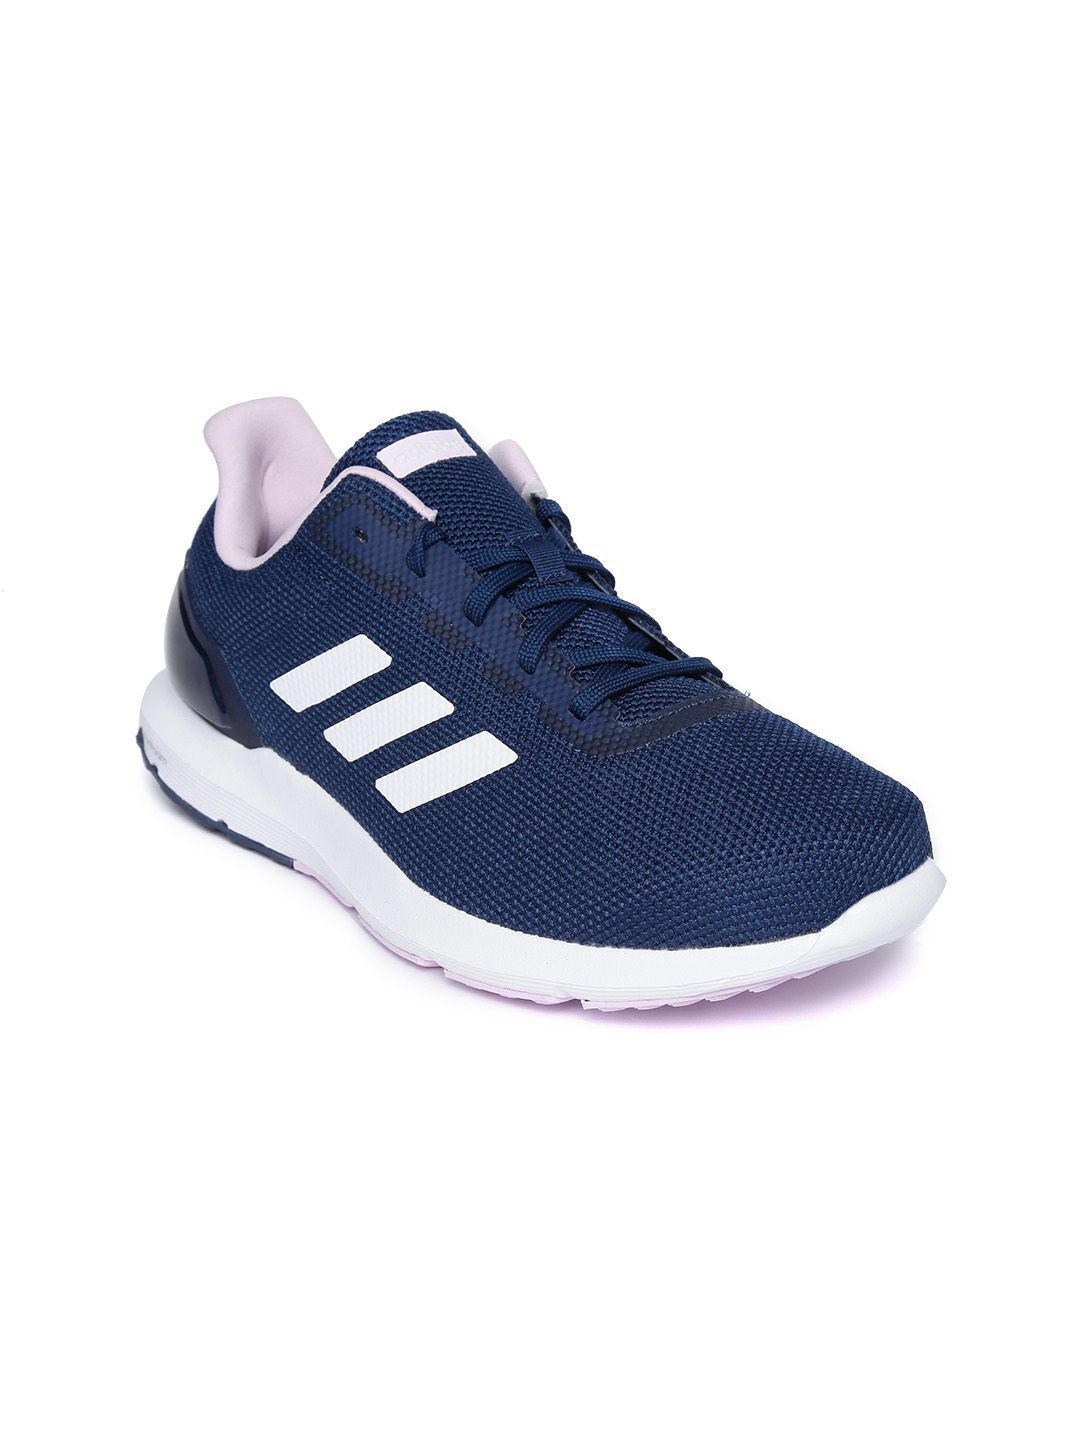 adidas shoes for women blue